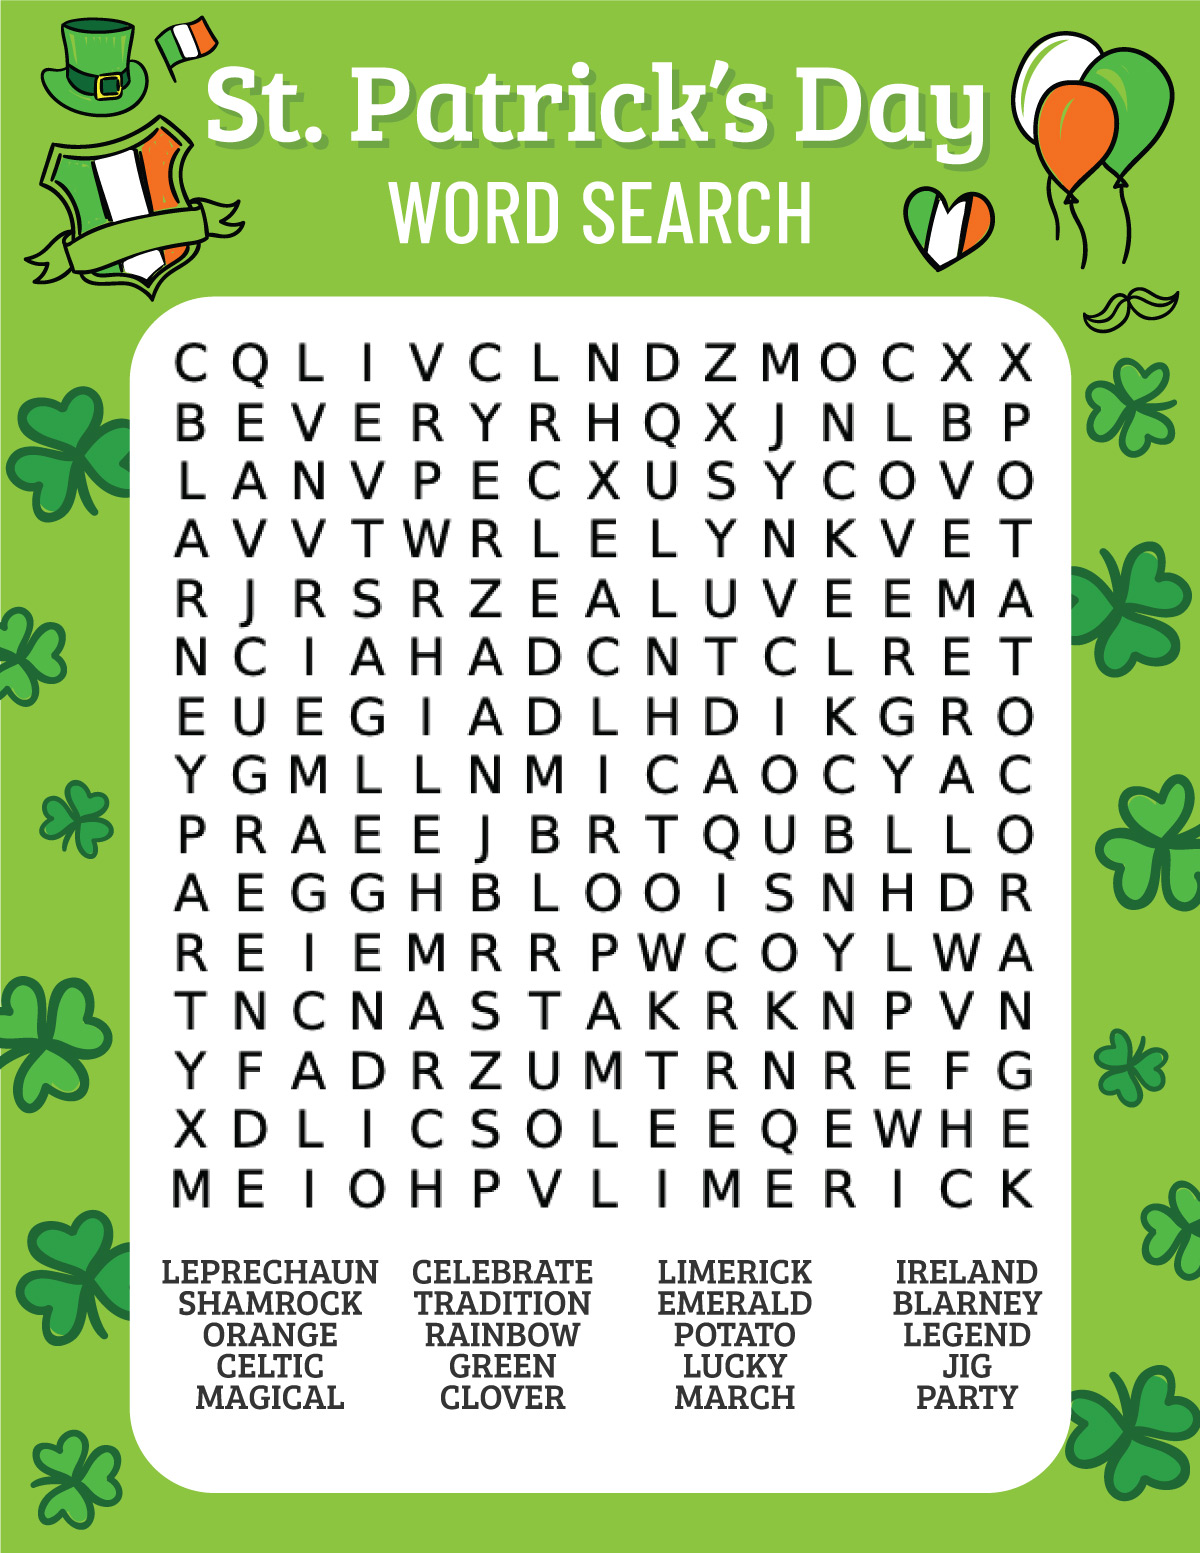 St. Patrick's Day word search